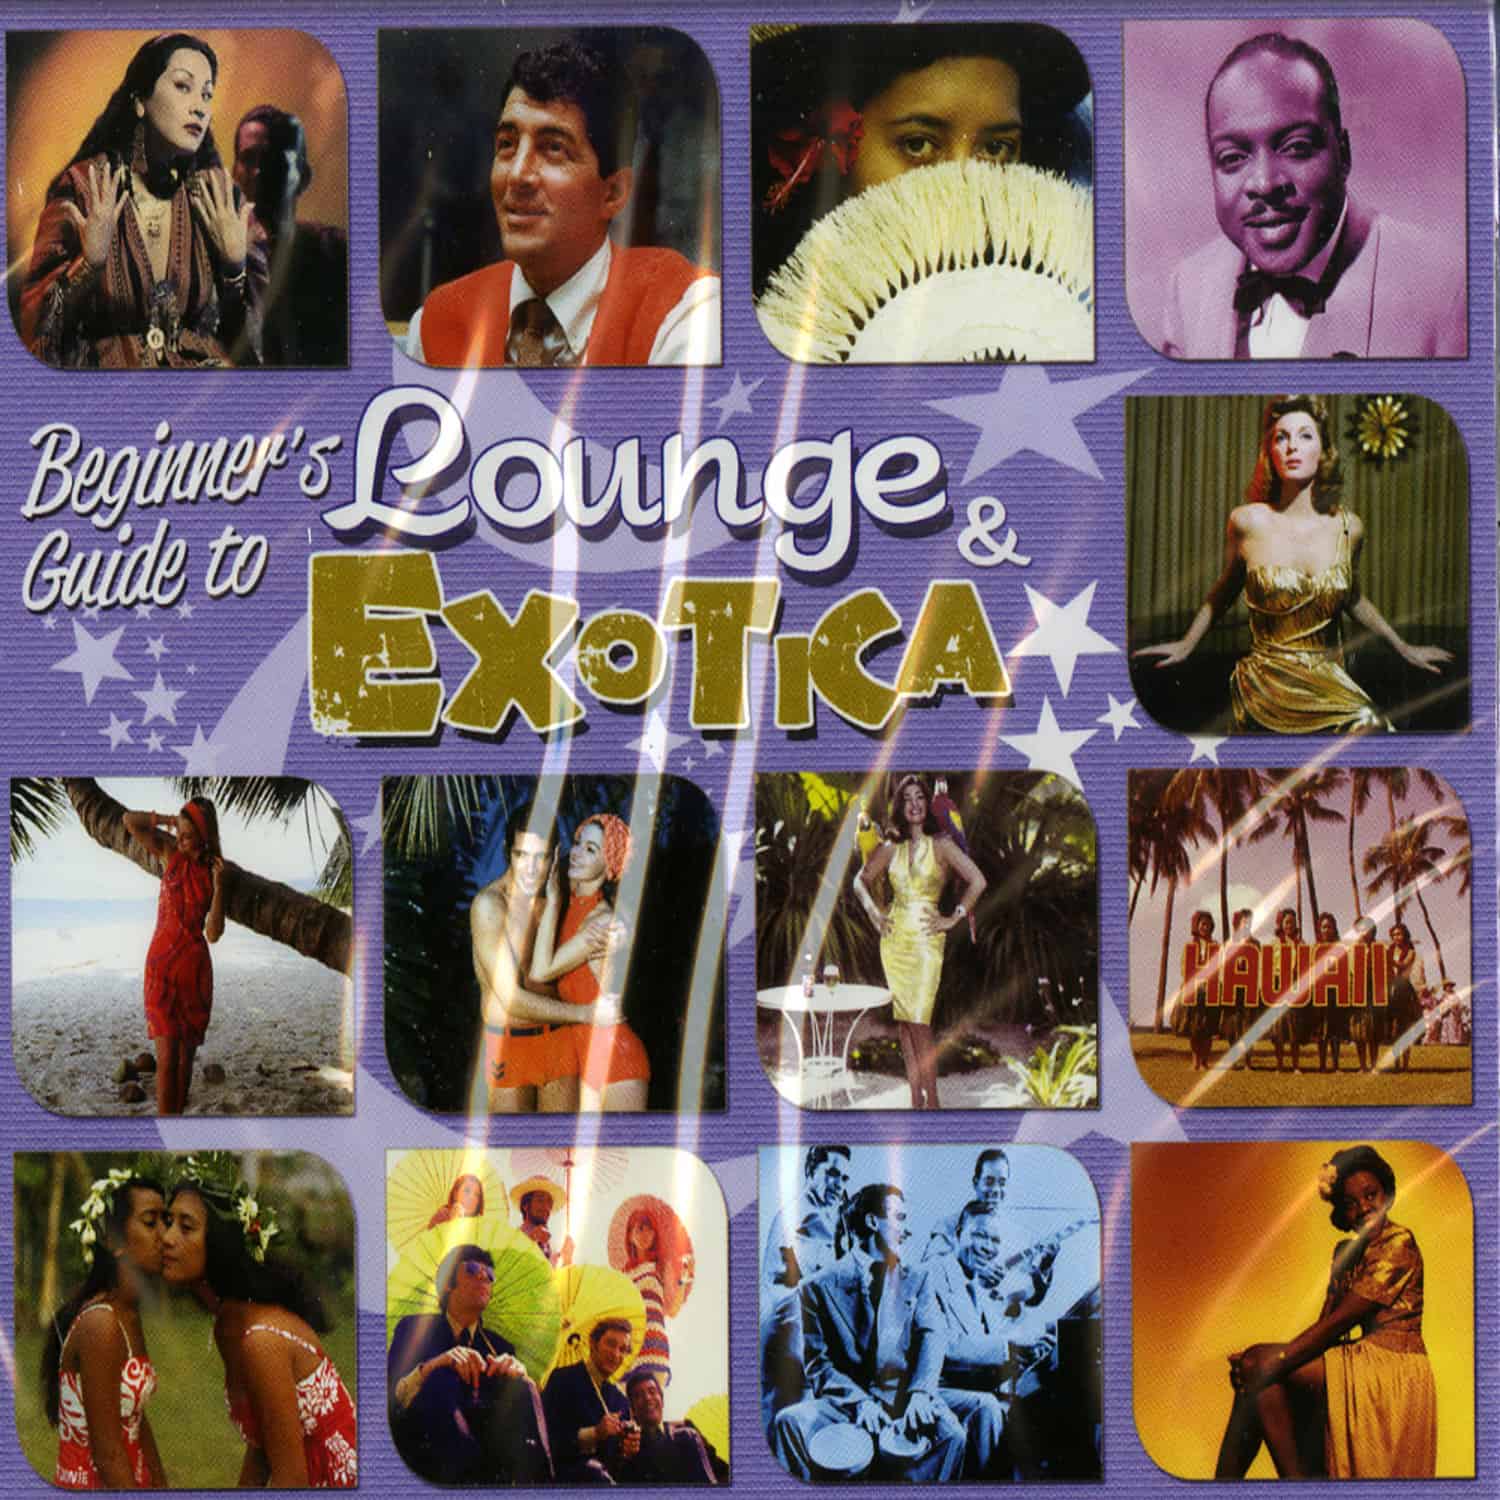 Various Artists - BEGINNERS GUIDE TO LOUNGE & EXOTICA 